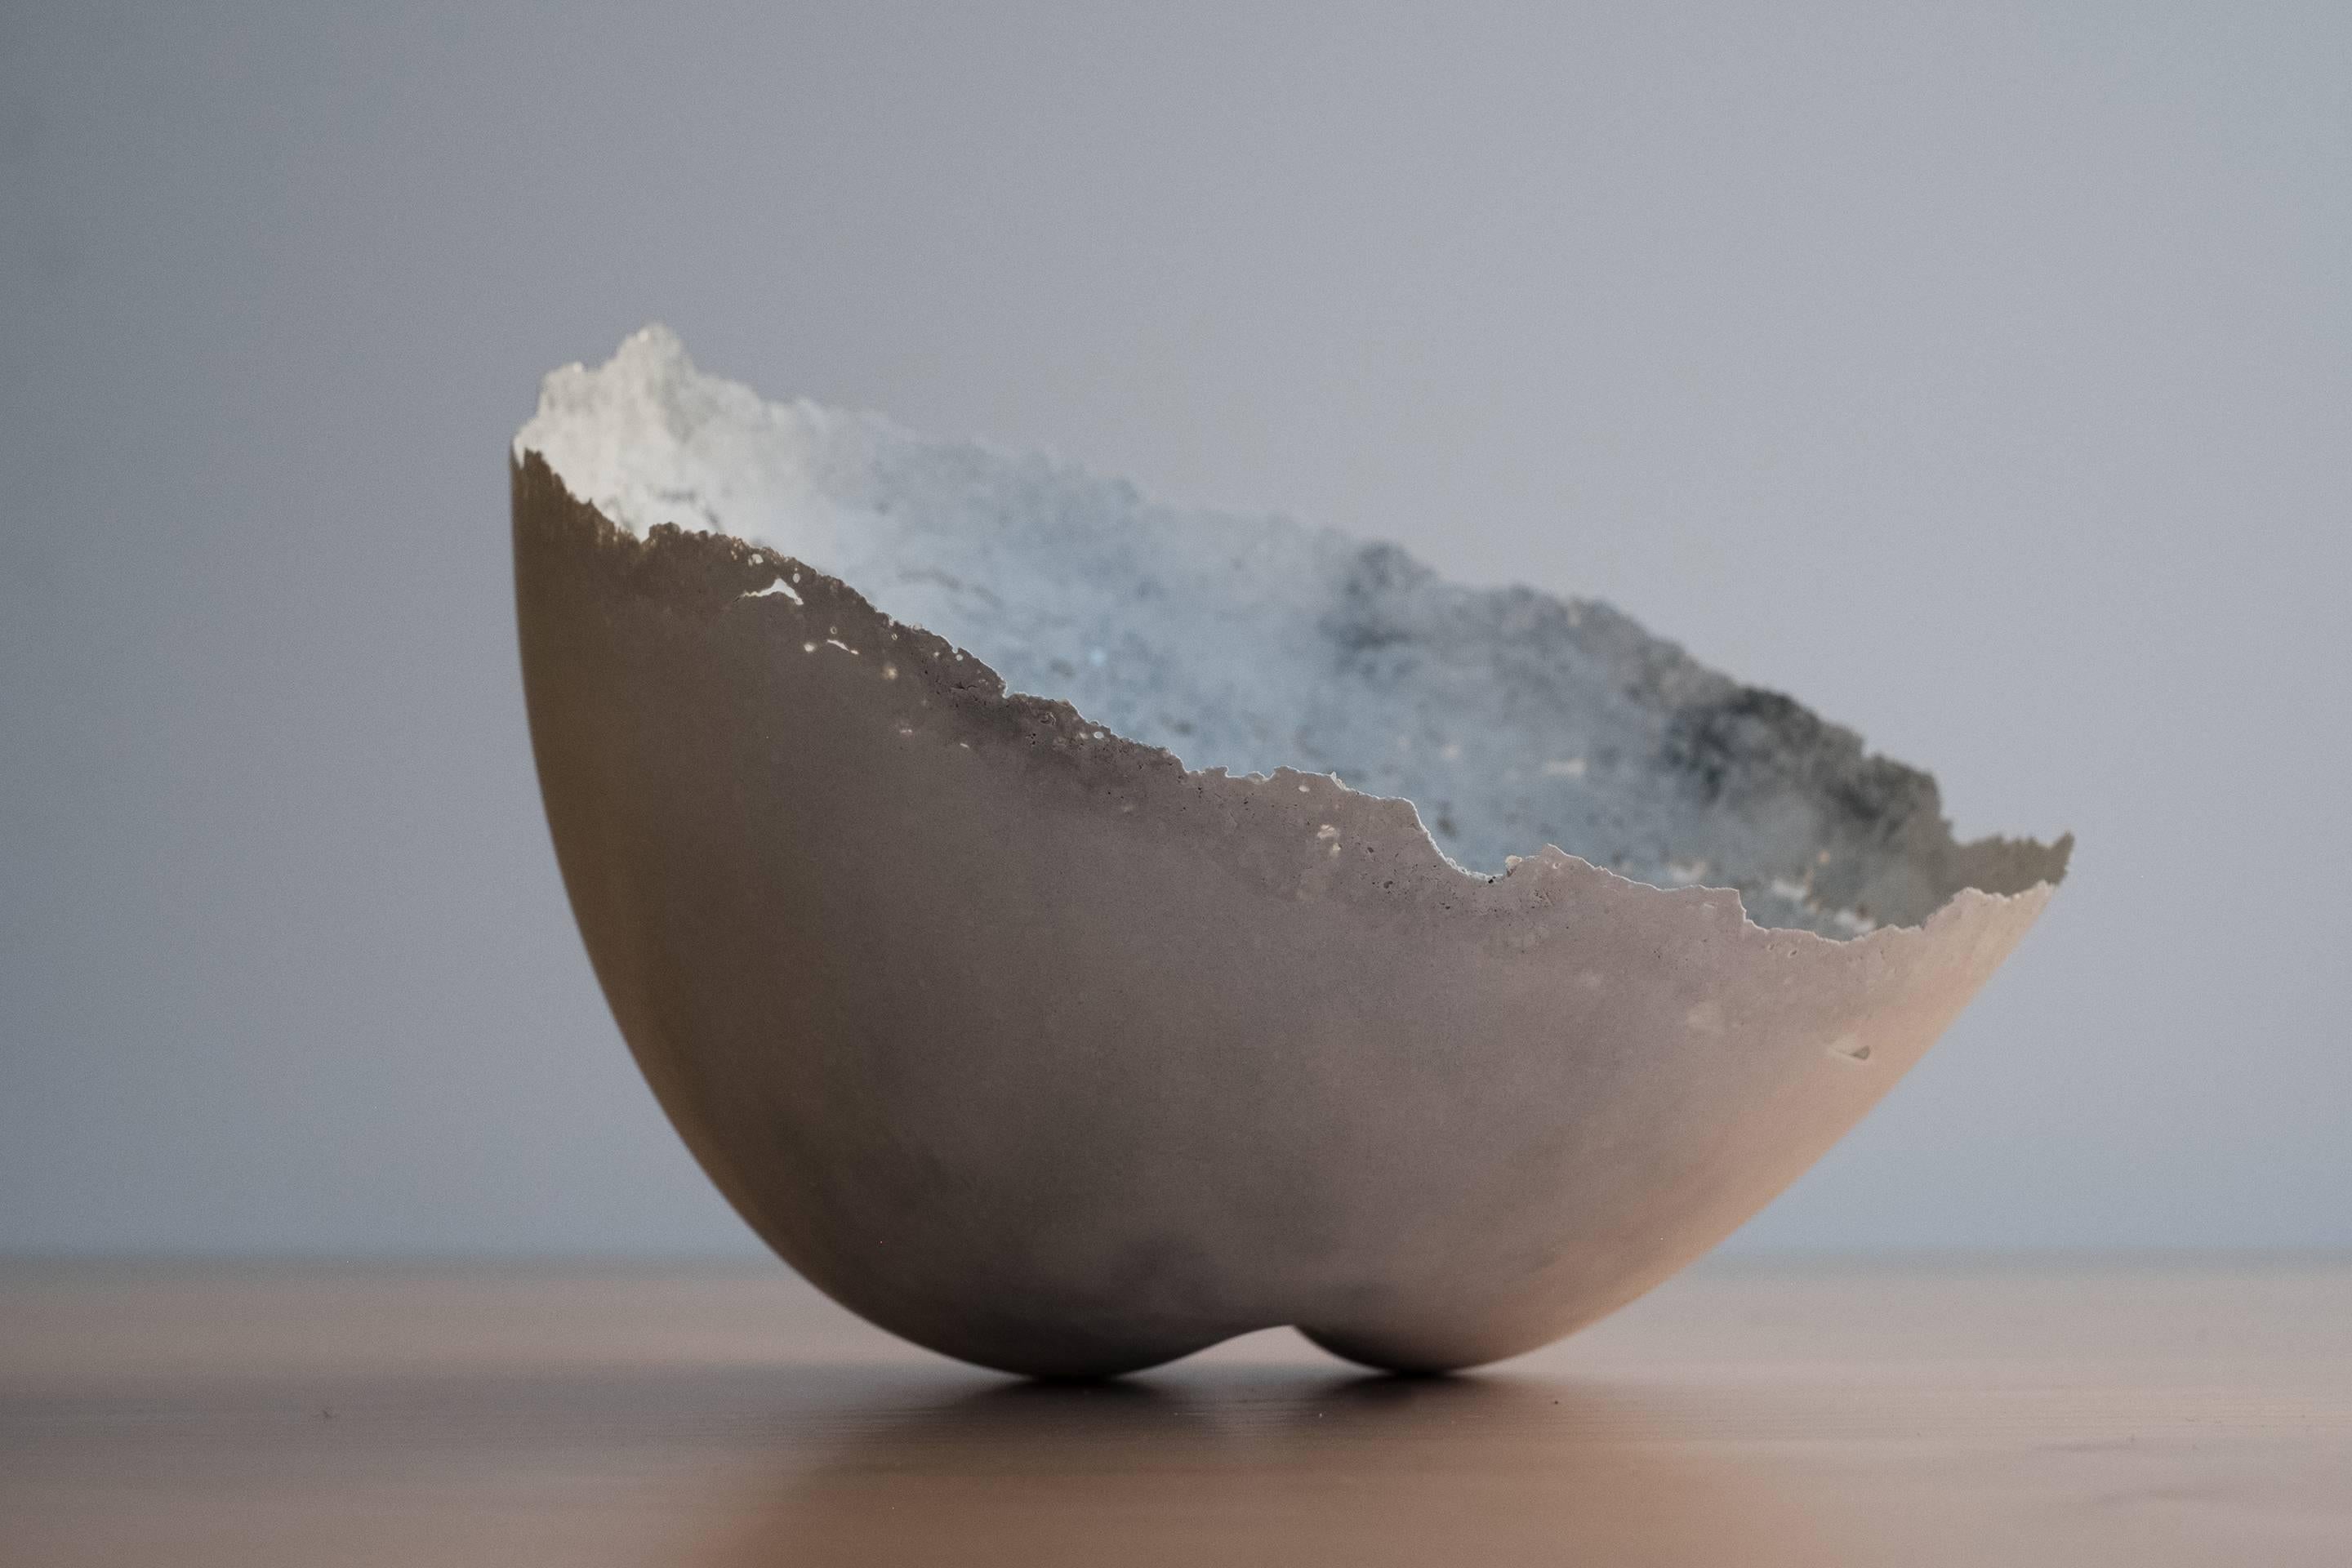 A collection of 104 unique bowls, the Concrete Series by UMÉ Studio expresses the tension between heavy concrete and its delicate edge generated by hand pouring. While one assumes concrete should be strong and durable, it is, at its core, fragile.